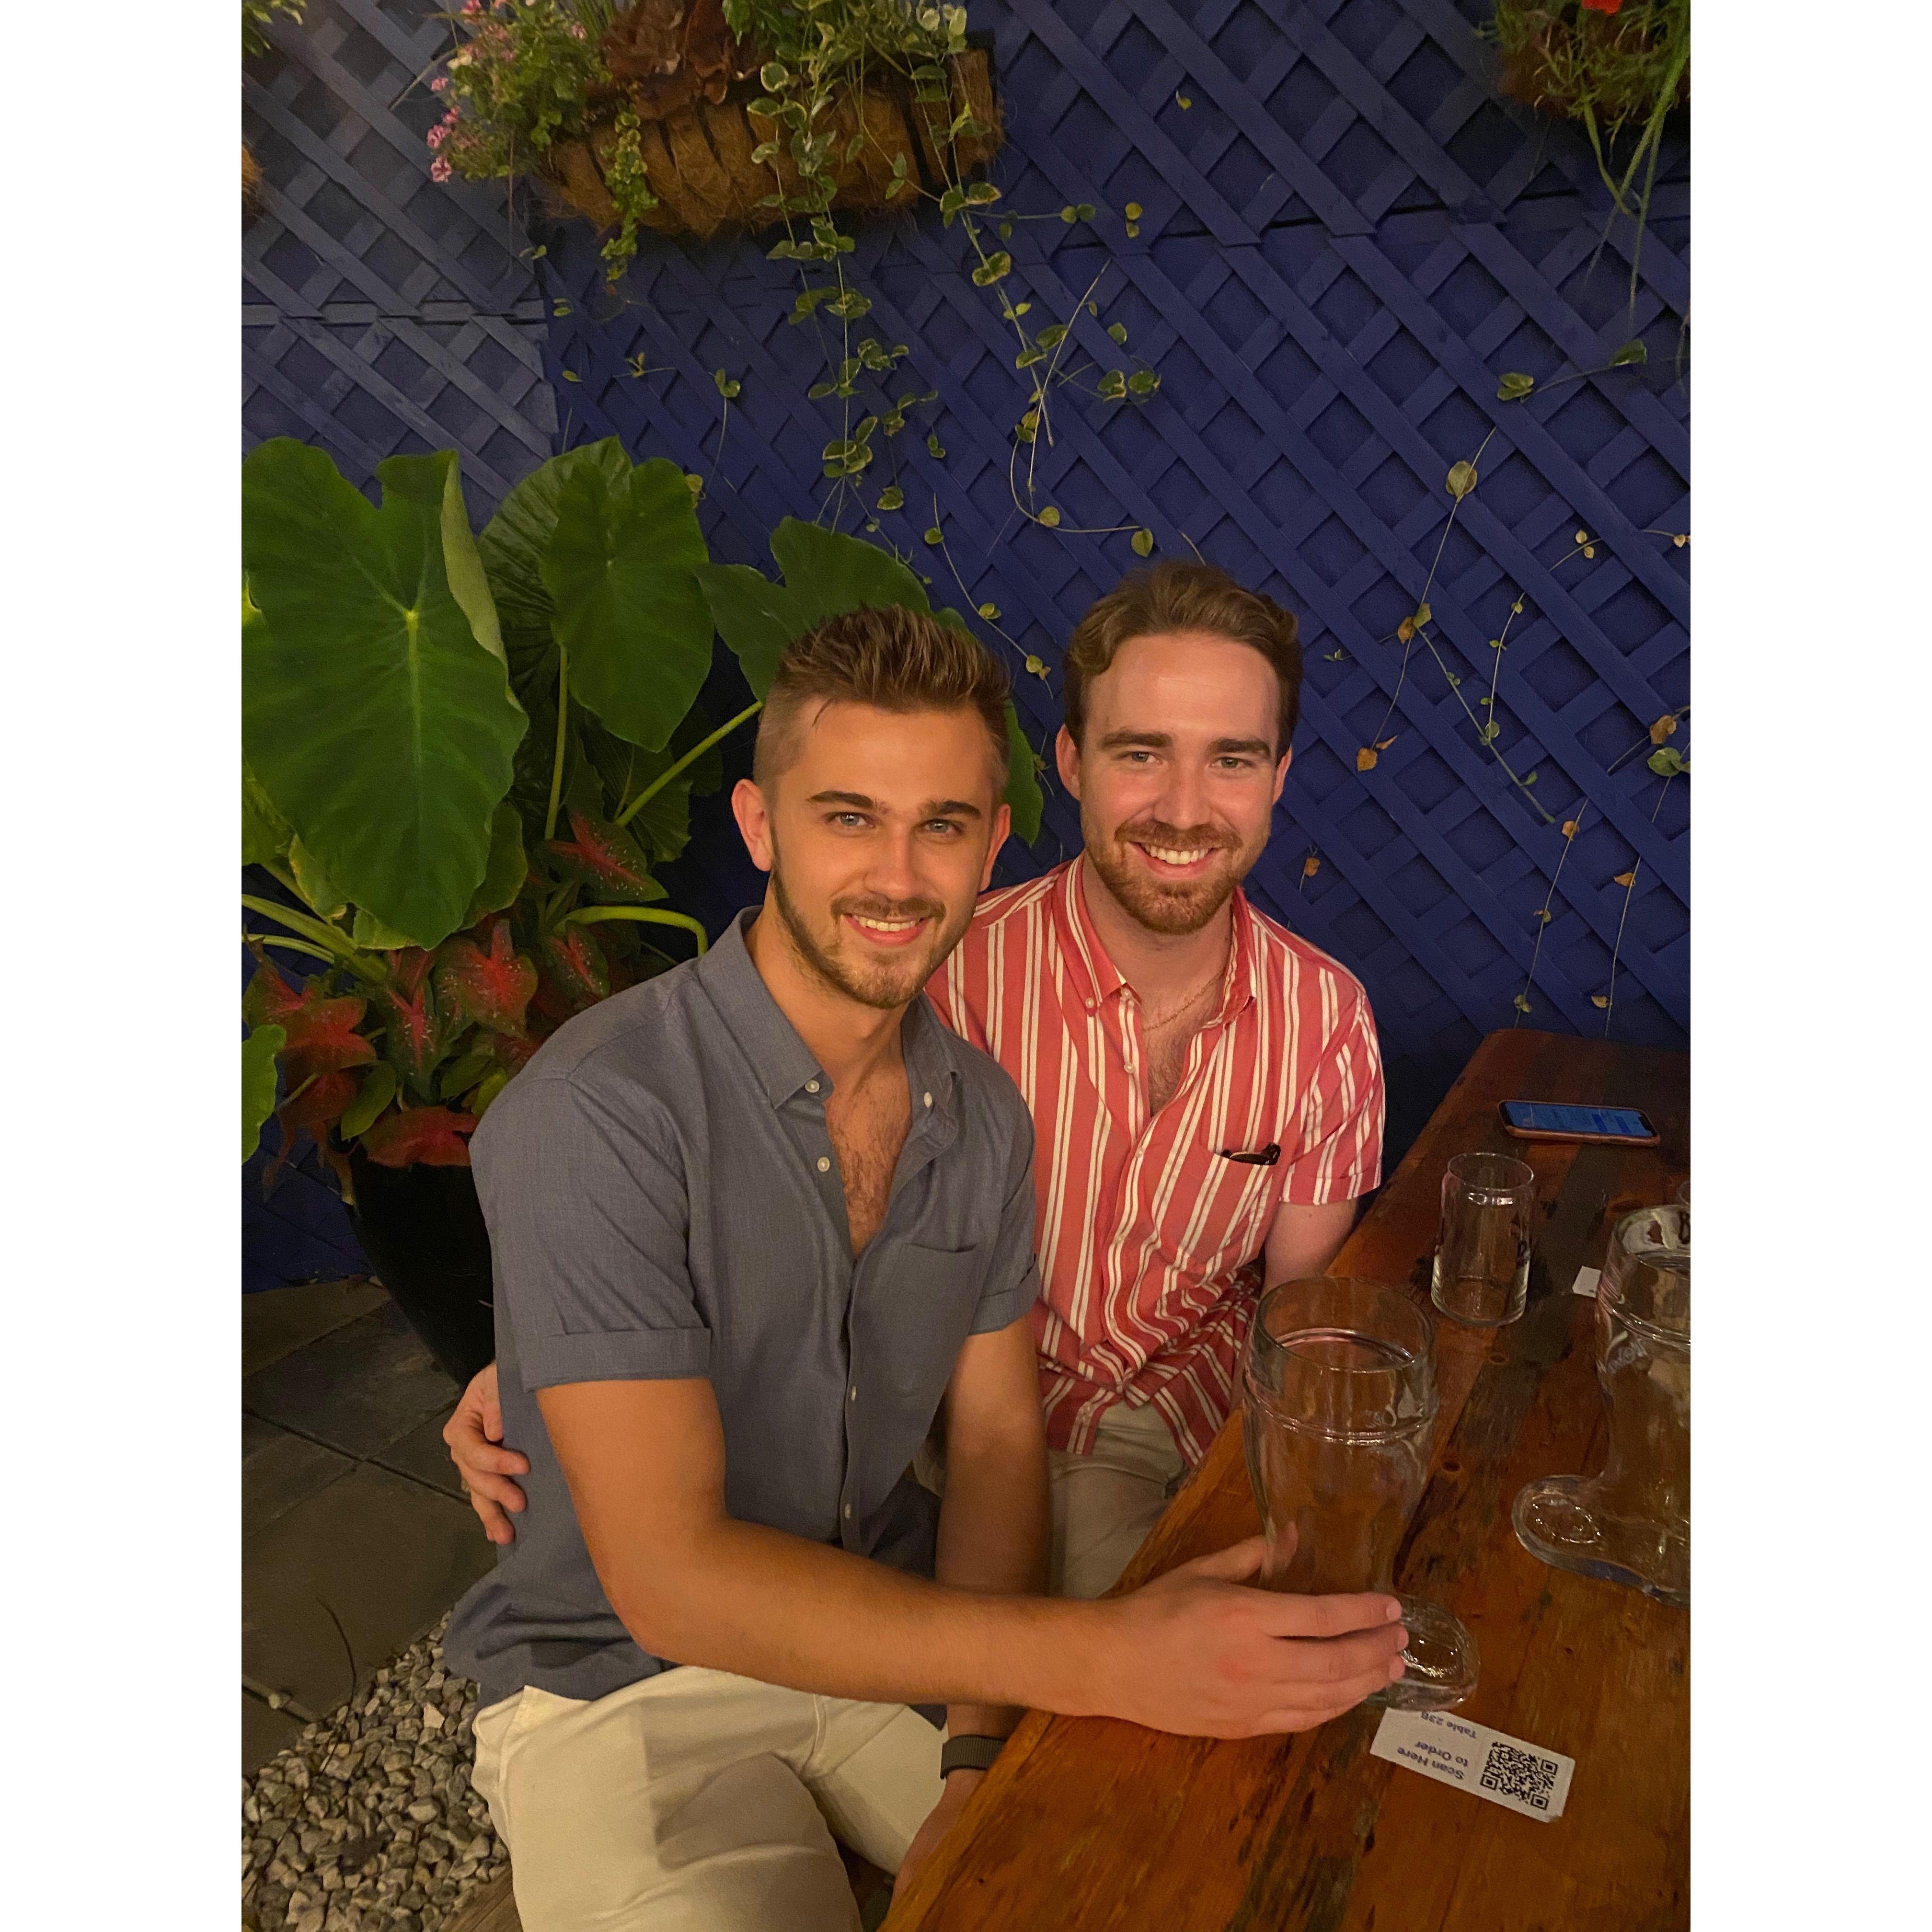 August: This is Connor and Michael's first picture together, taken August 1 2020. This was the first time since meeting that the two could join their friends for a drink outside due to the pandemic.